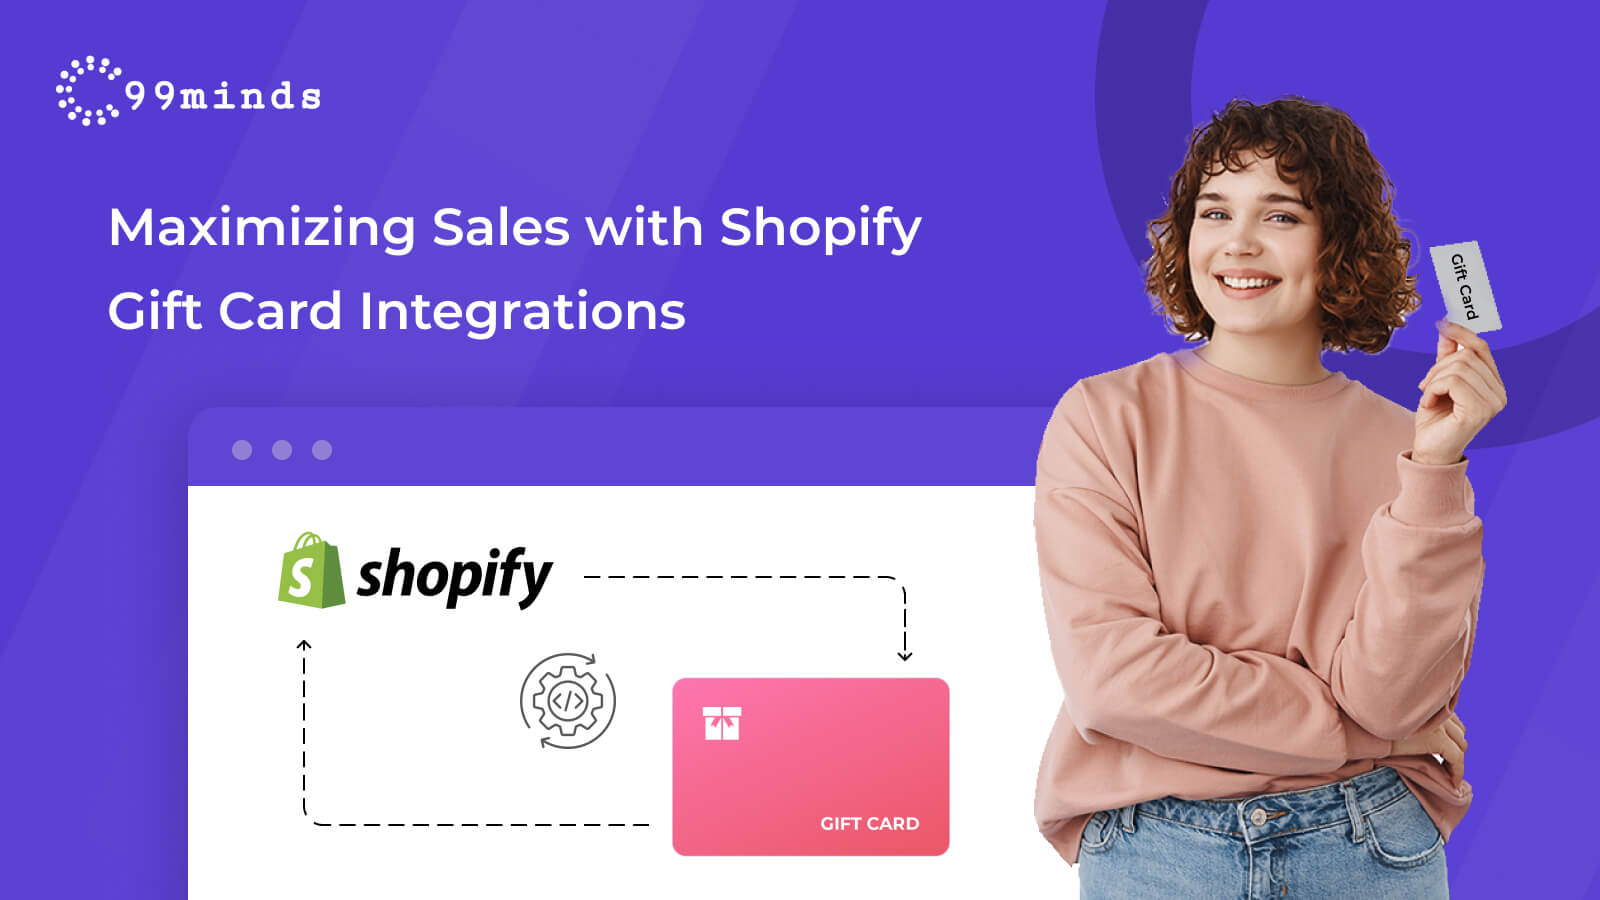 Maximize Gift Card Sales By Integrating Gift Cards Into Your Shopify Store